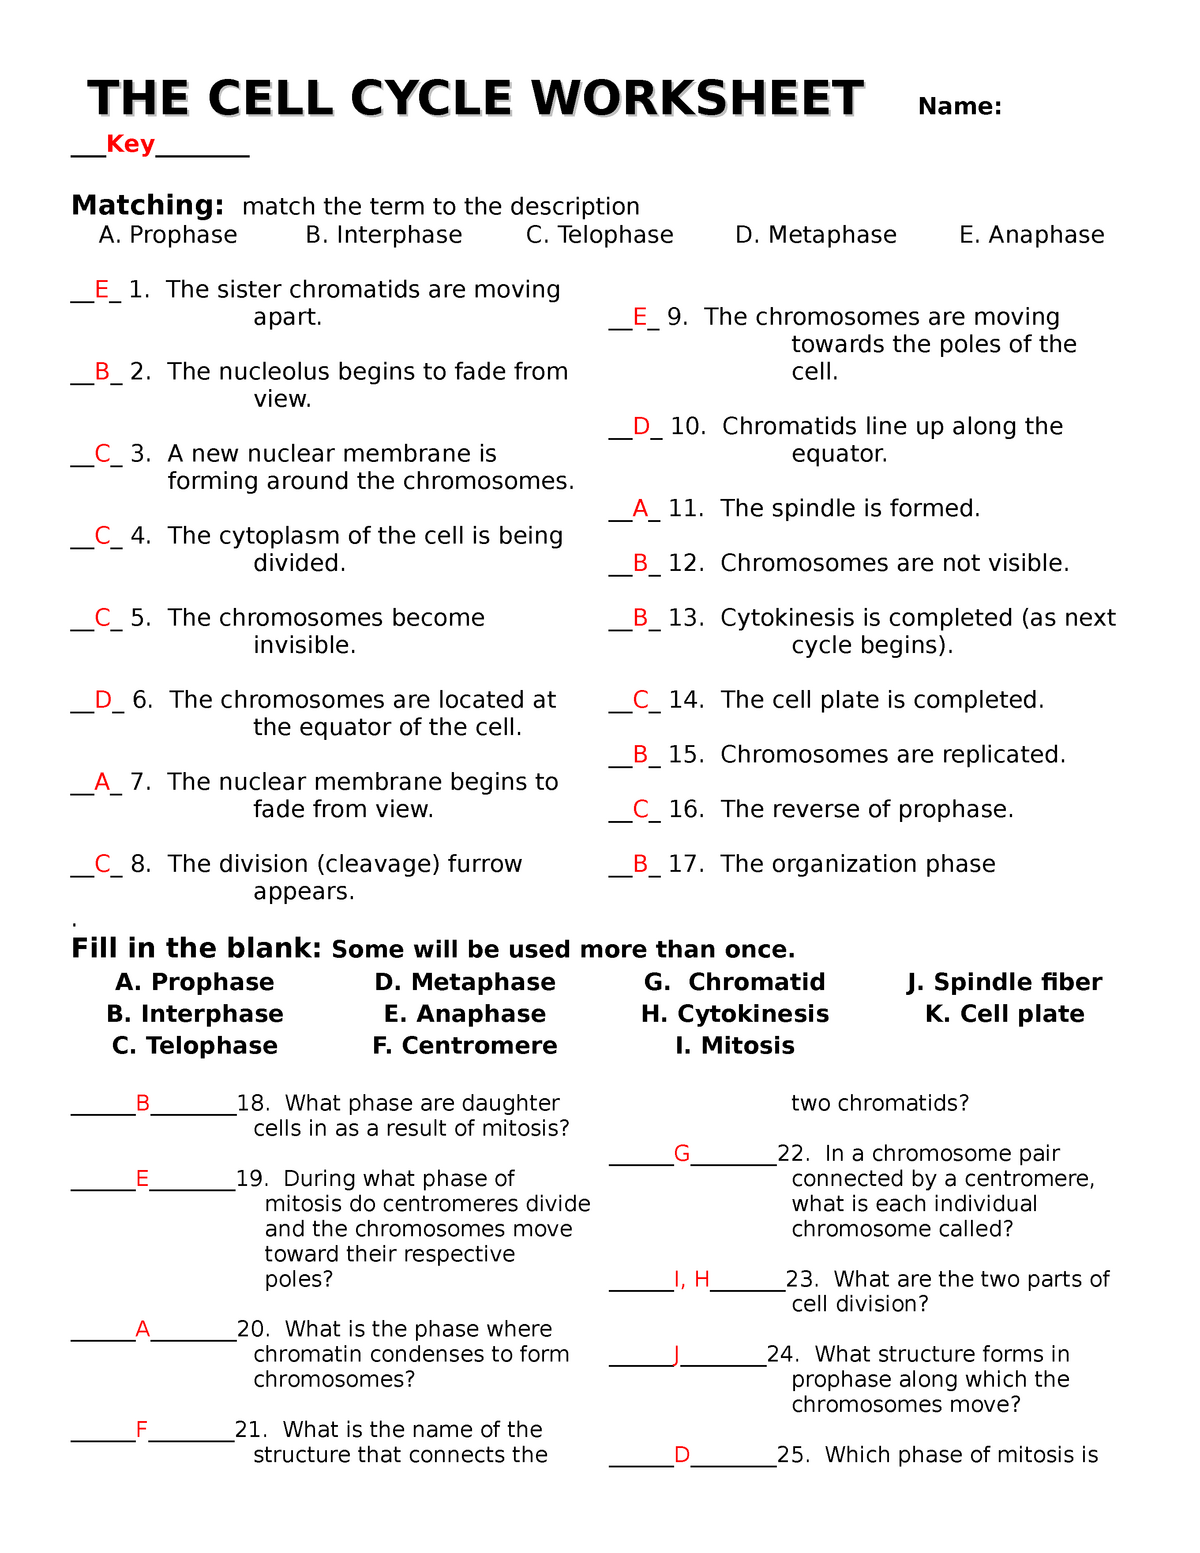 The-cell-cycle-worksheet with answers - THE CELL CYCLE WORKSHEET Within Cell Division Worksheet Answers